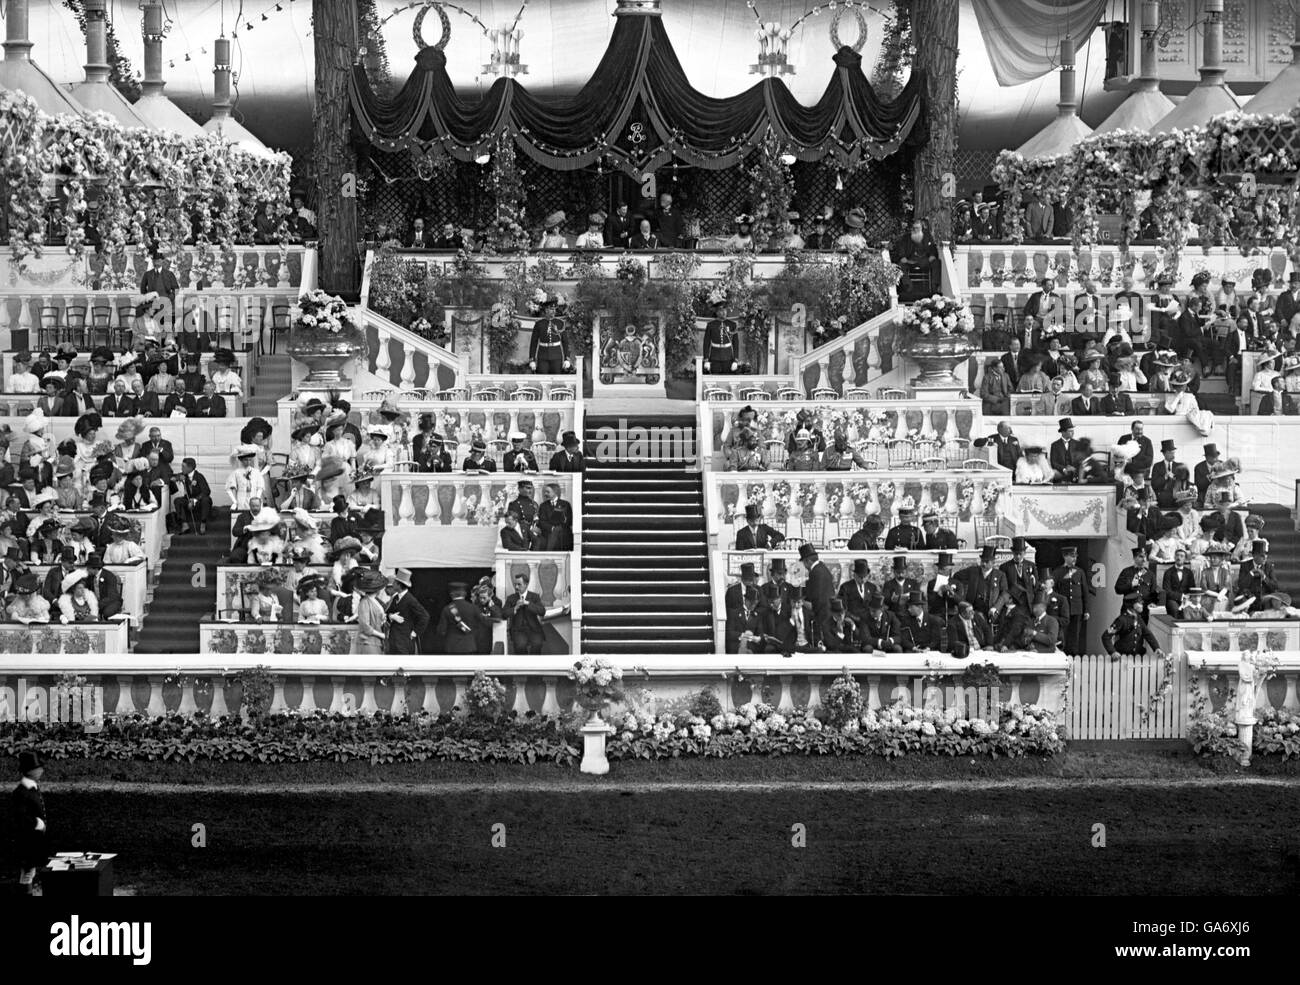 A view of the Royal Box at the International Horse Show held at Olympia. Stock Photo